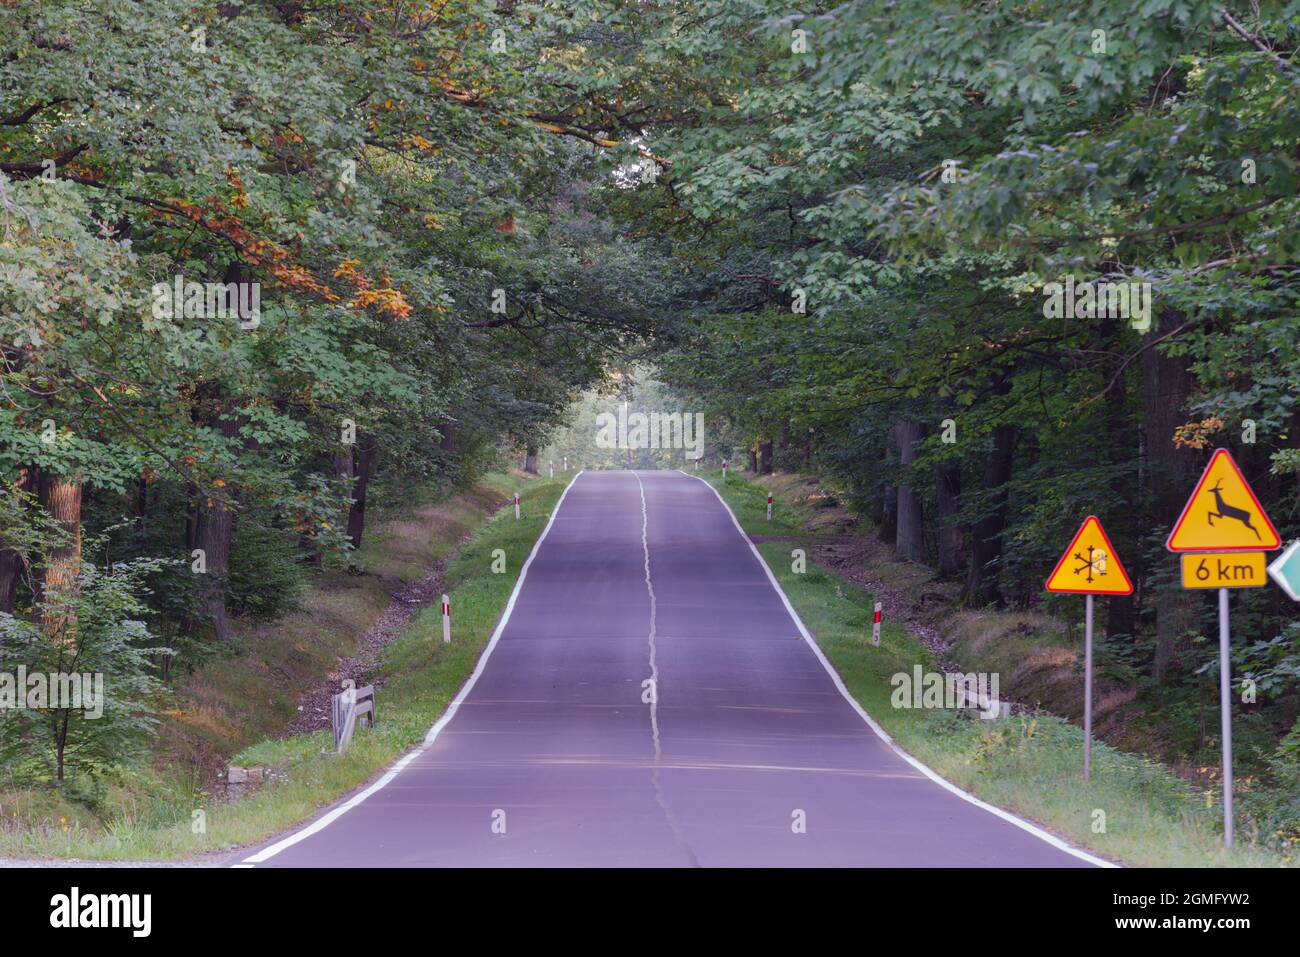 Asphalt road climbing up a small hill. There is a tall, deciduous forest on both sides of the road. Stock Photo